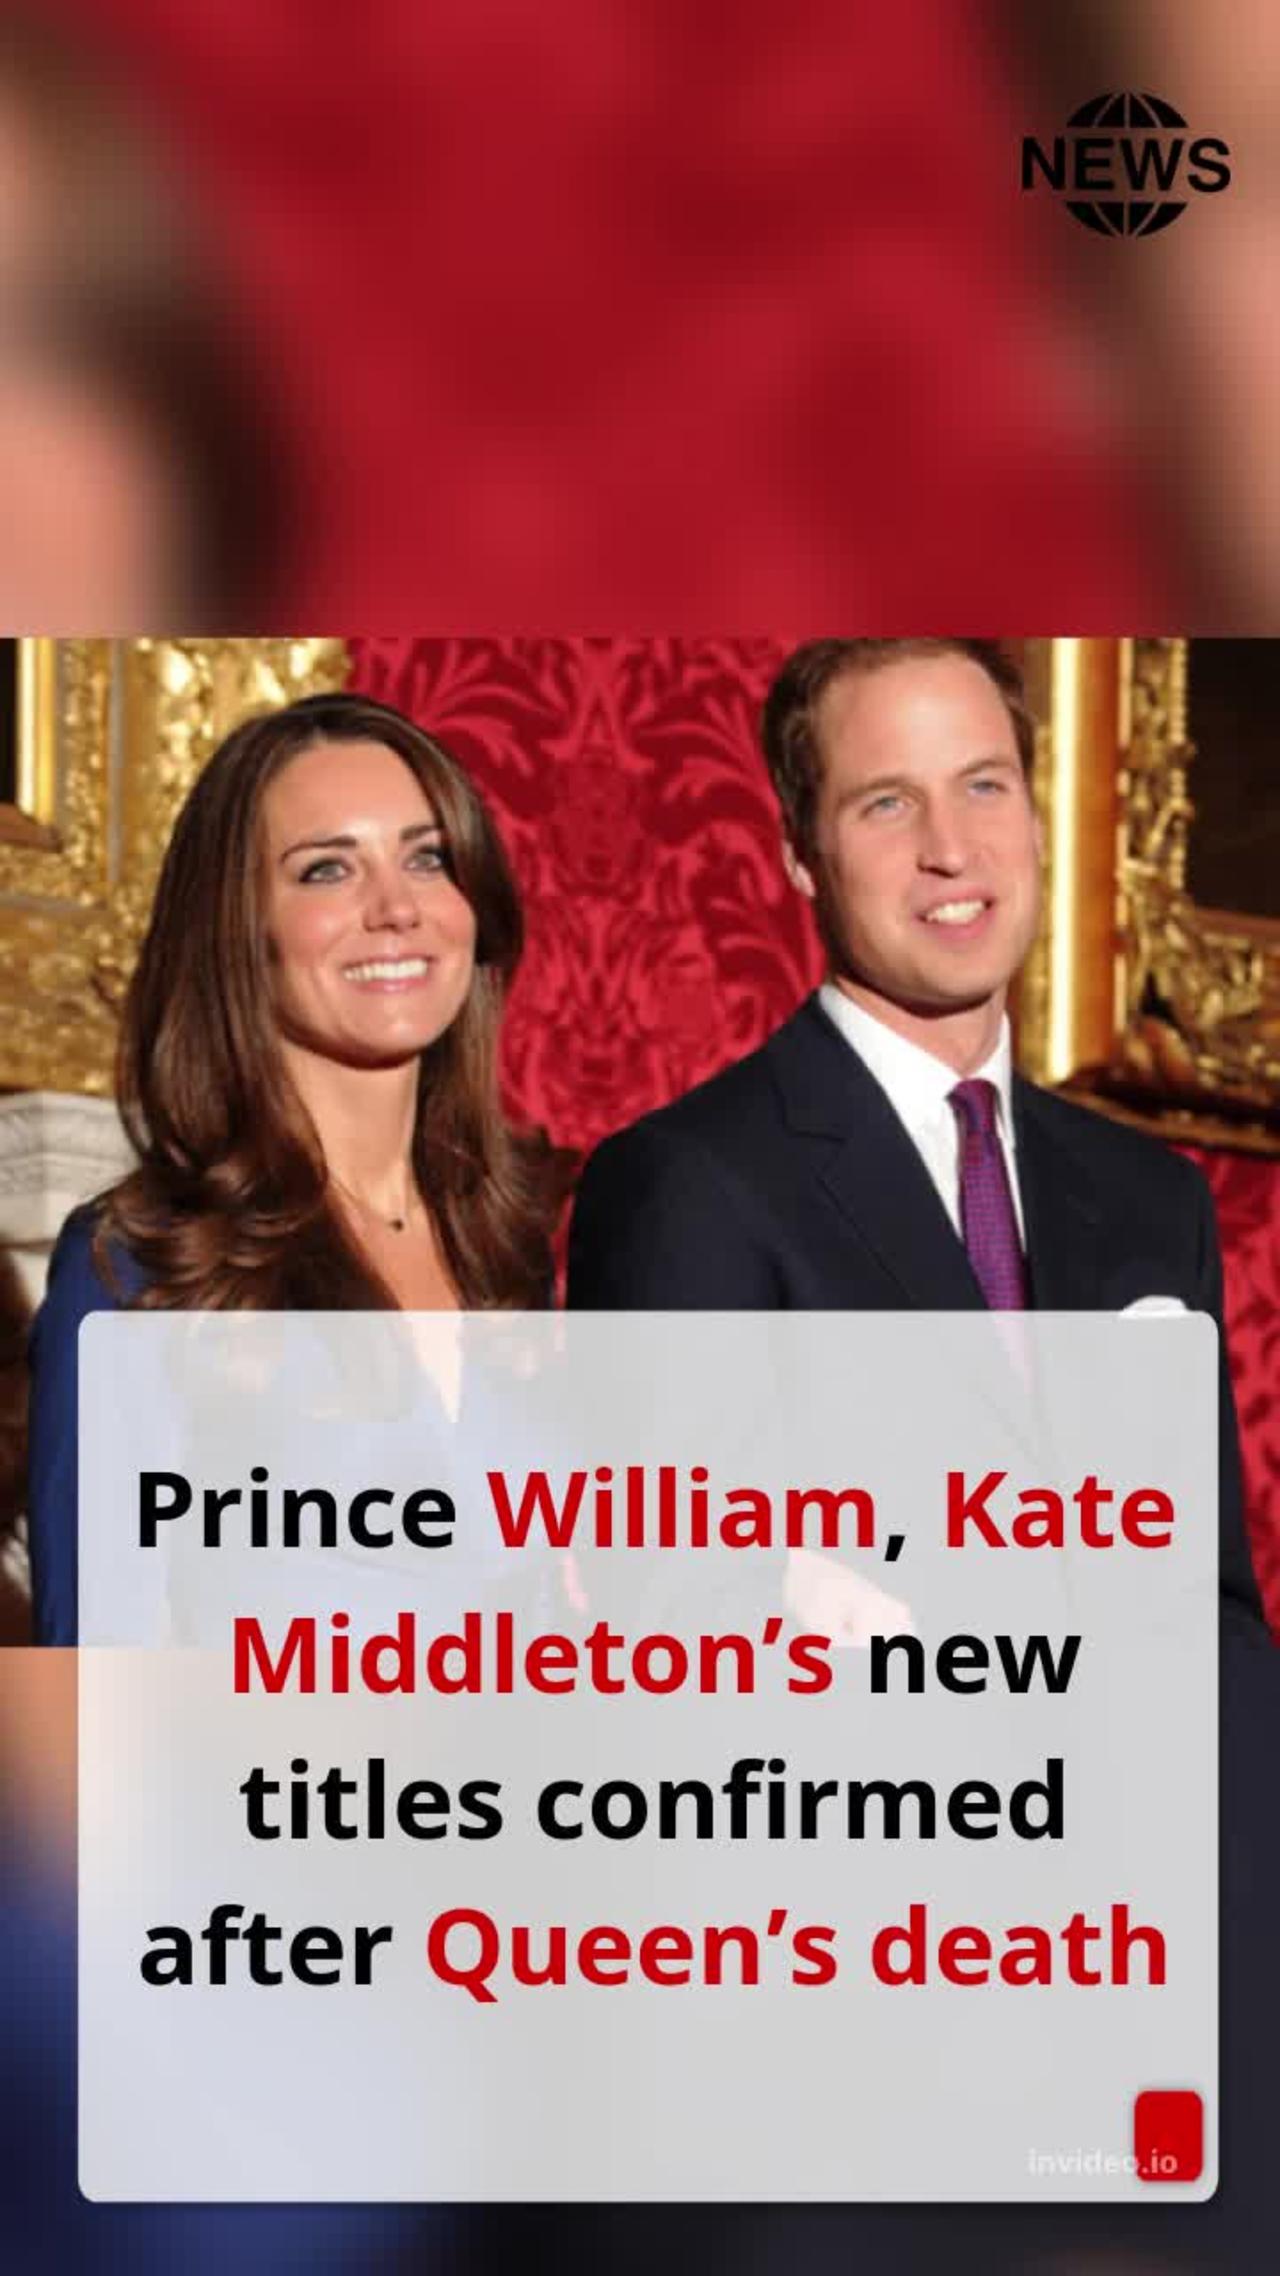 Prince William, Kate Middleton’s new titles confirmed after Queen’s death